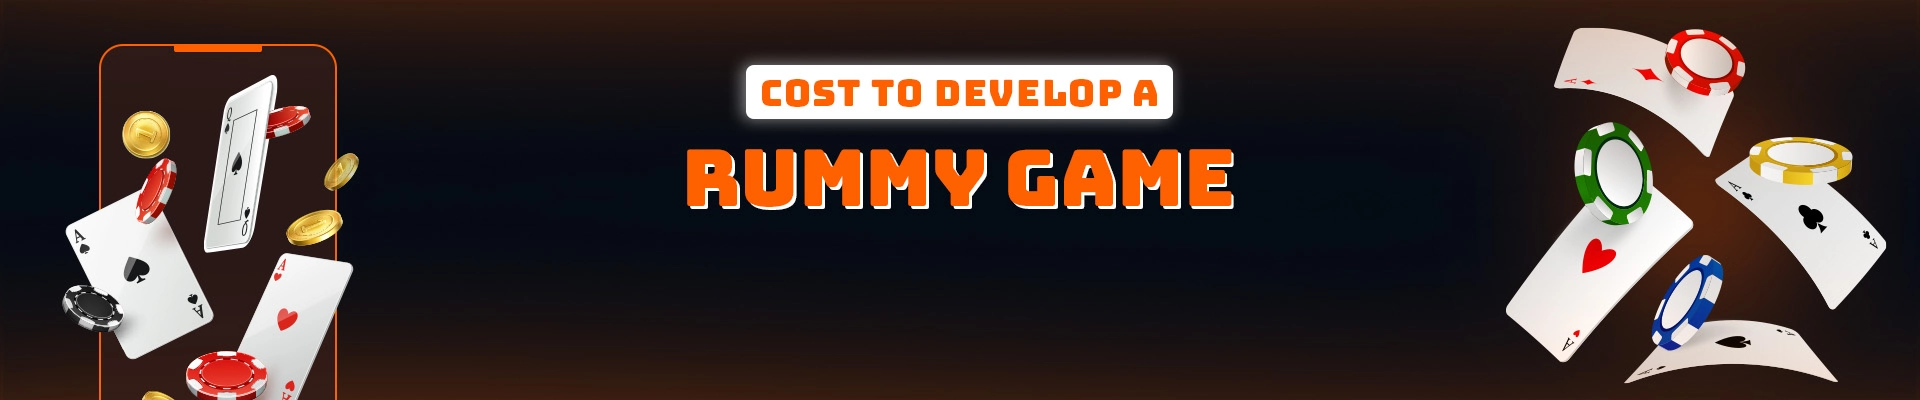 Cost to Develop a Rummy Game